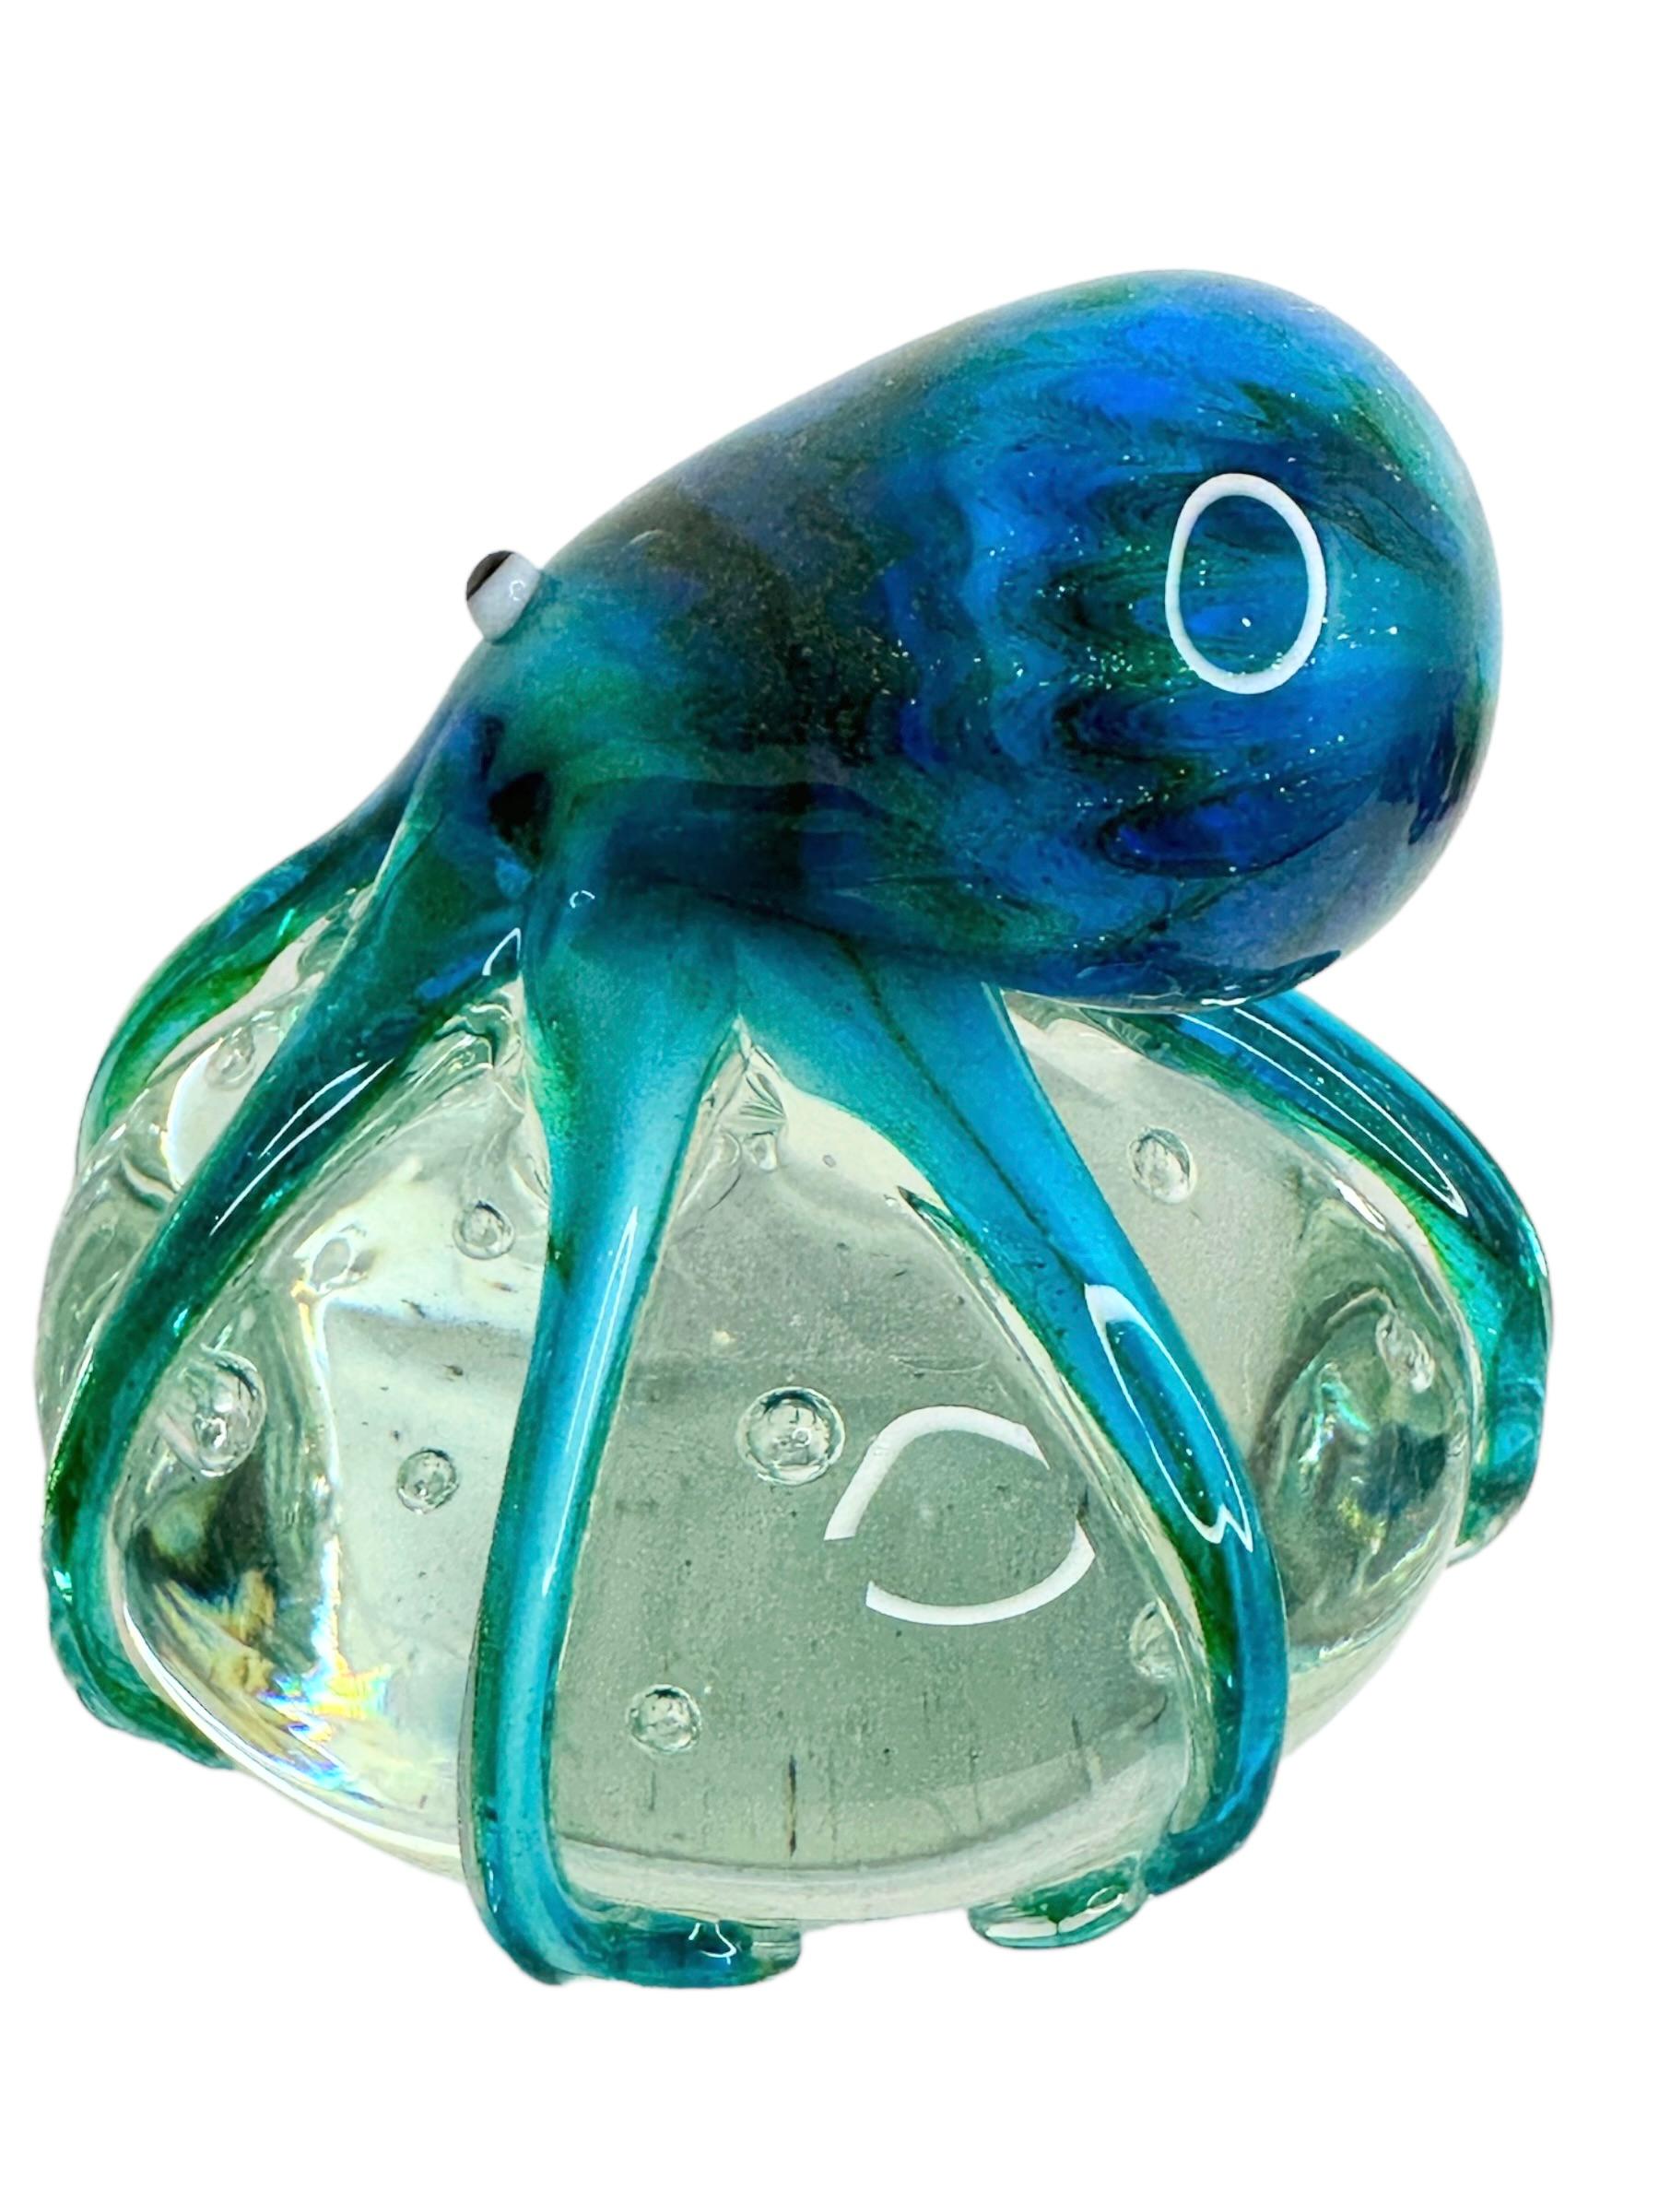 Gorgeous Murano Italian Art Glass Giant Octopus Paperweight, Italy, 1980s For Sale 1